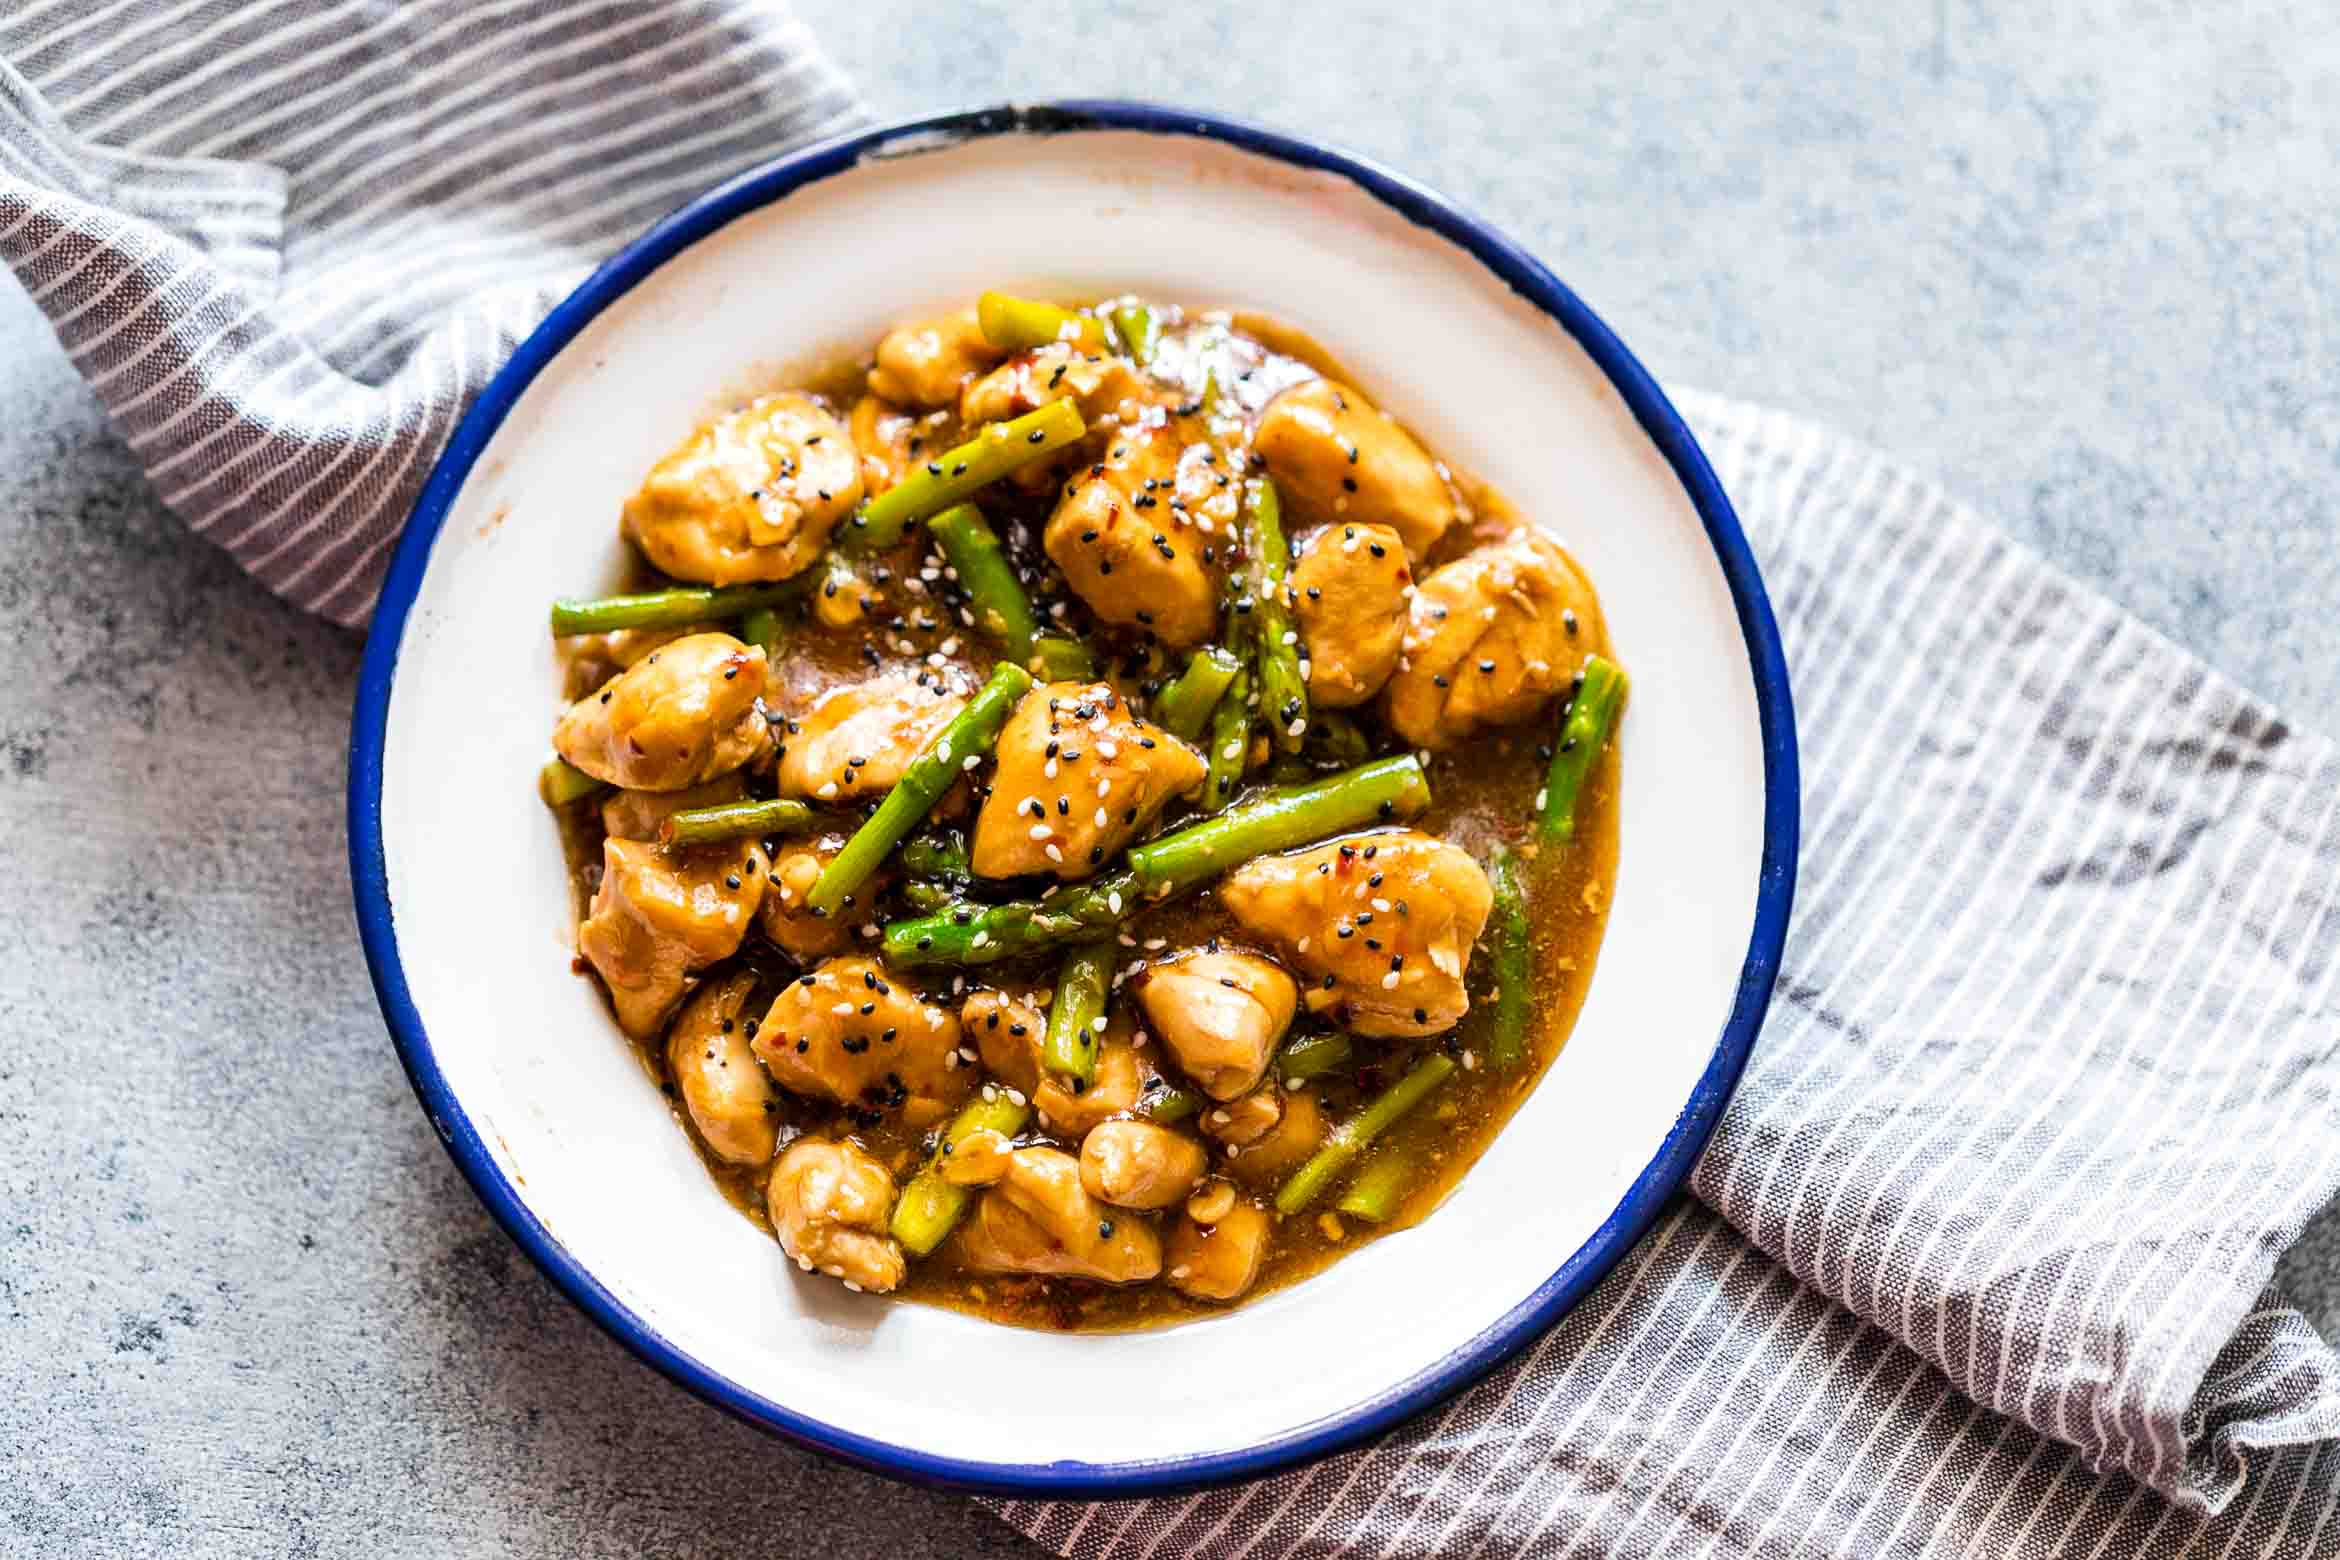 Easy lemon ginger chicken asparagus stir fry is a quick, 30 minute asian recipe that's sure to be a hit with the family. It's low carb and can gluten free too so you can enjoy it guilt-free!